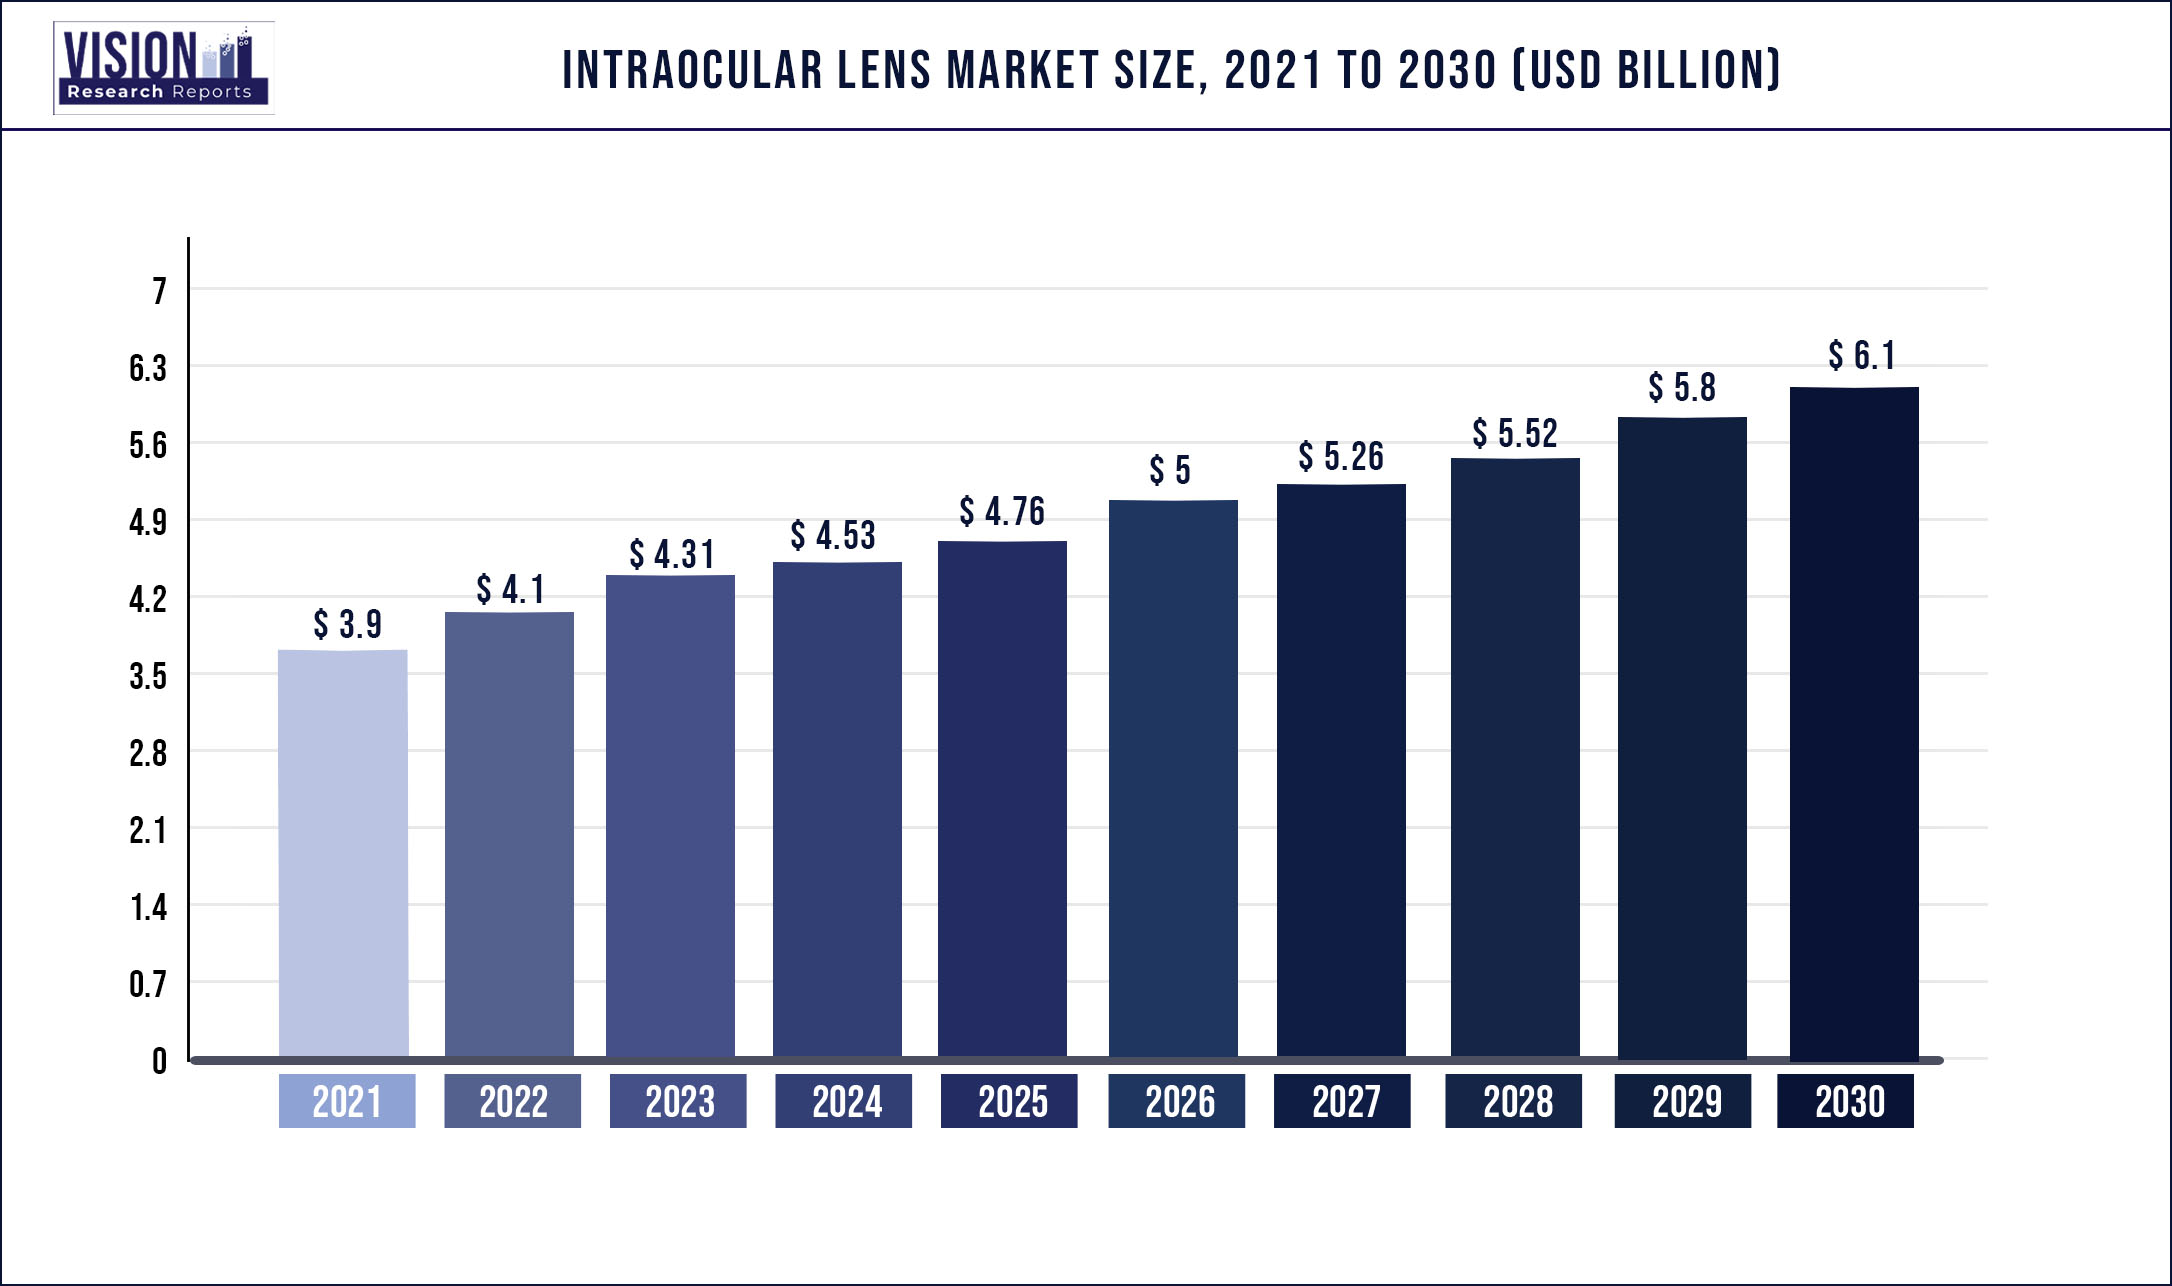 Intraocular Lens Market Size 2021 to 2030